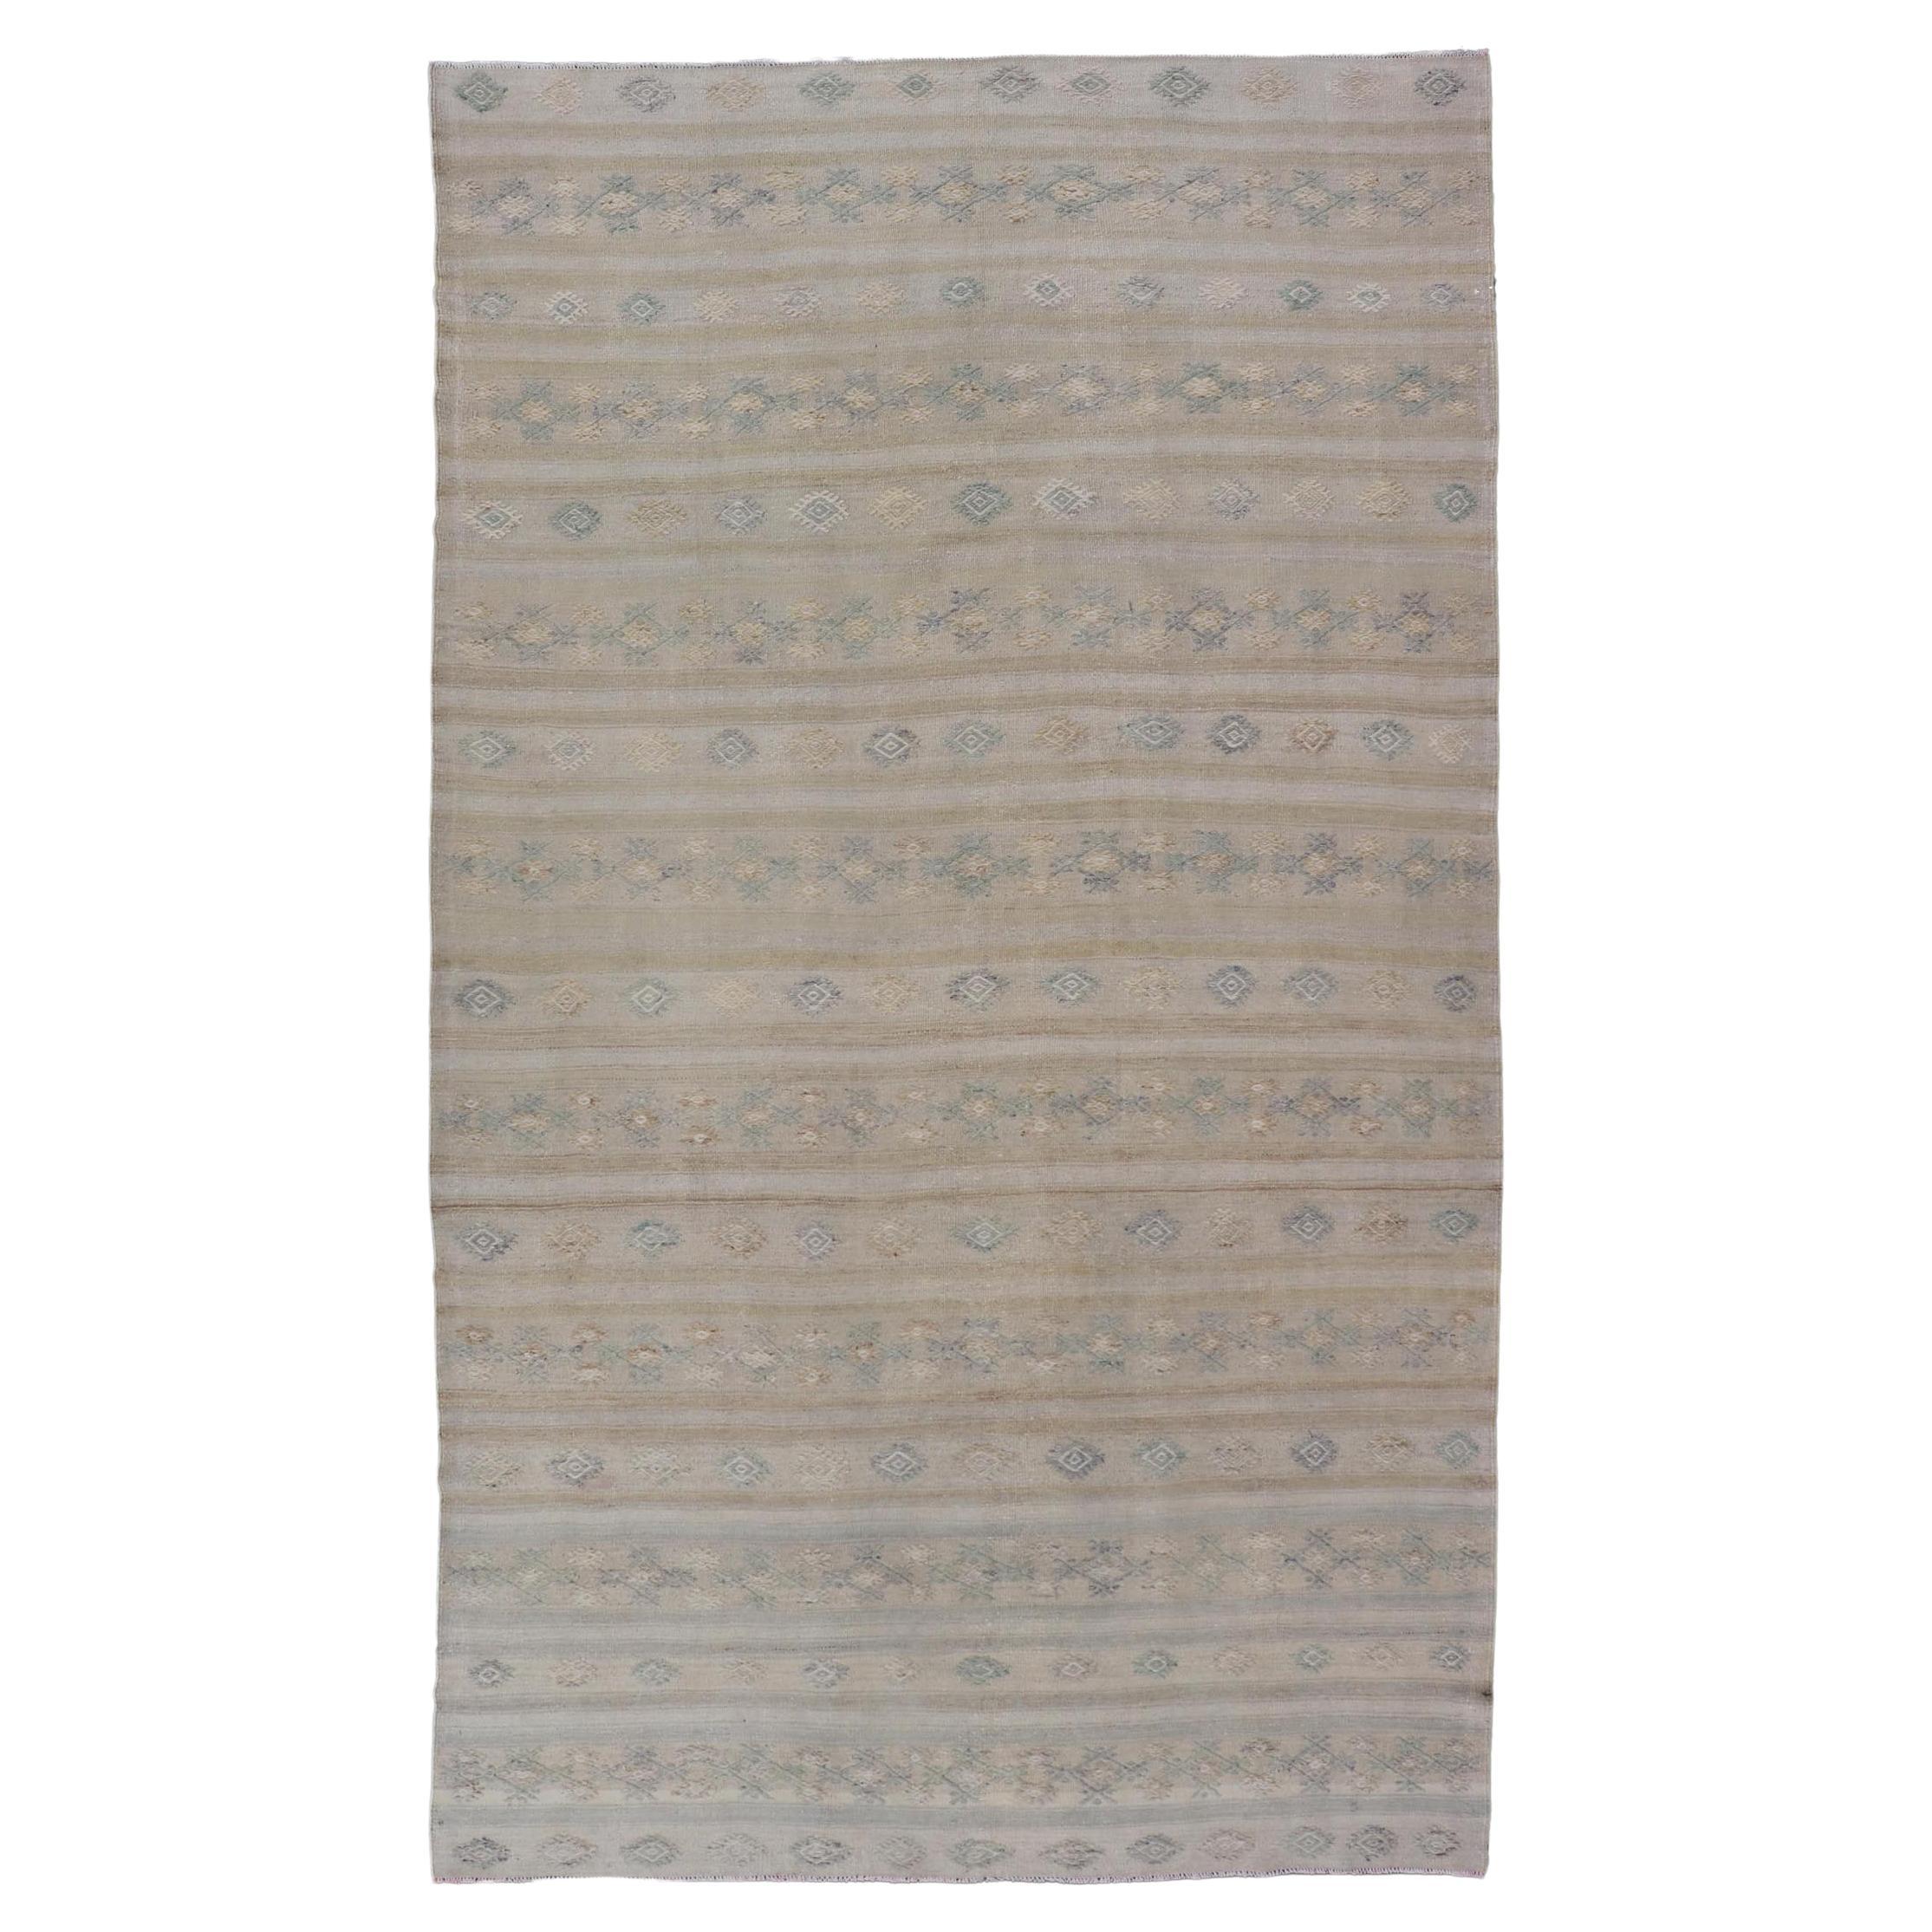 Turkish Vintage Gallery Flat-Weave Kilim With Stripes and Embroideries For Sale